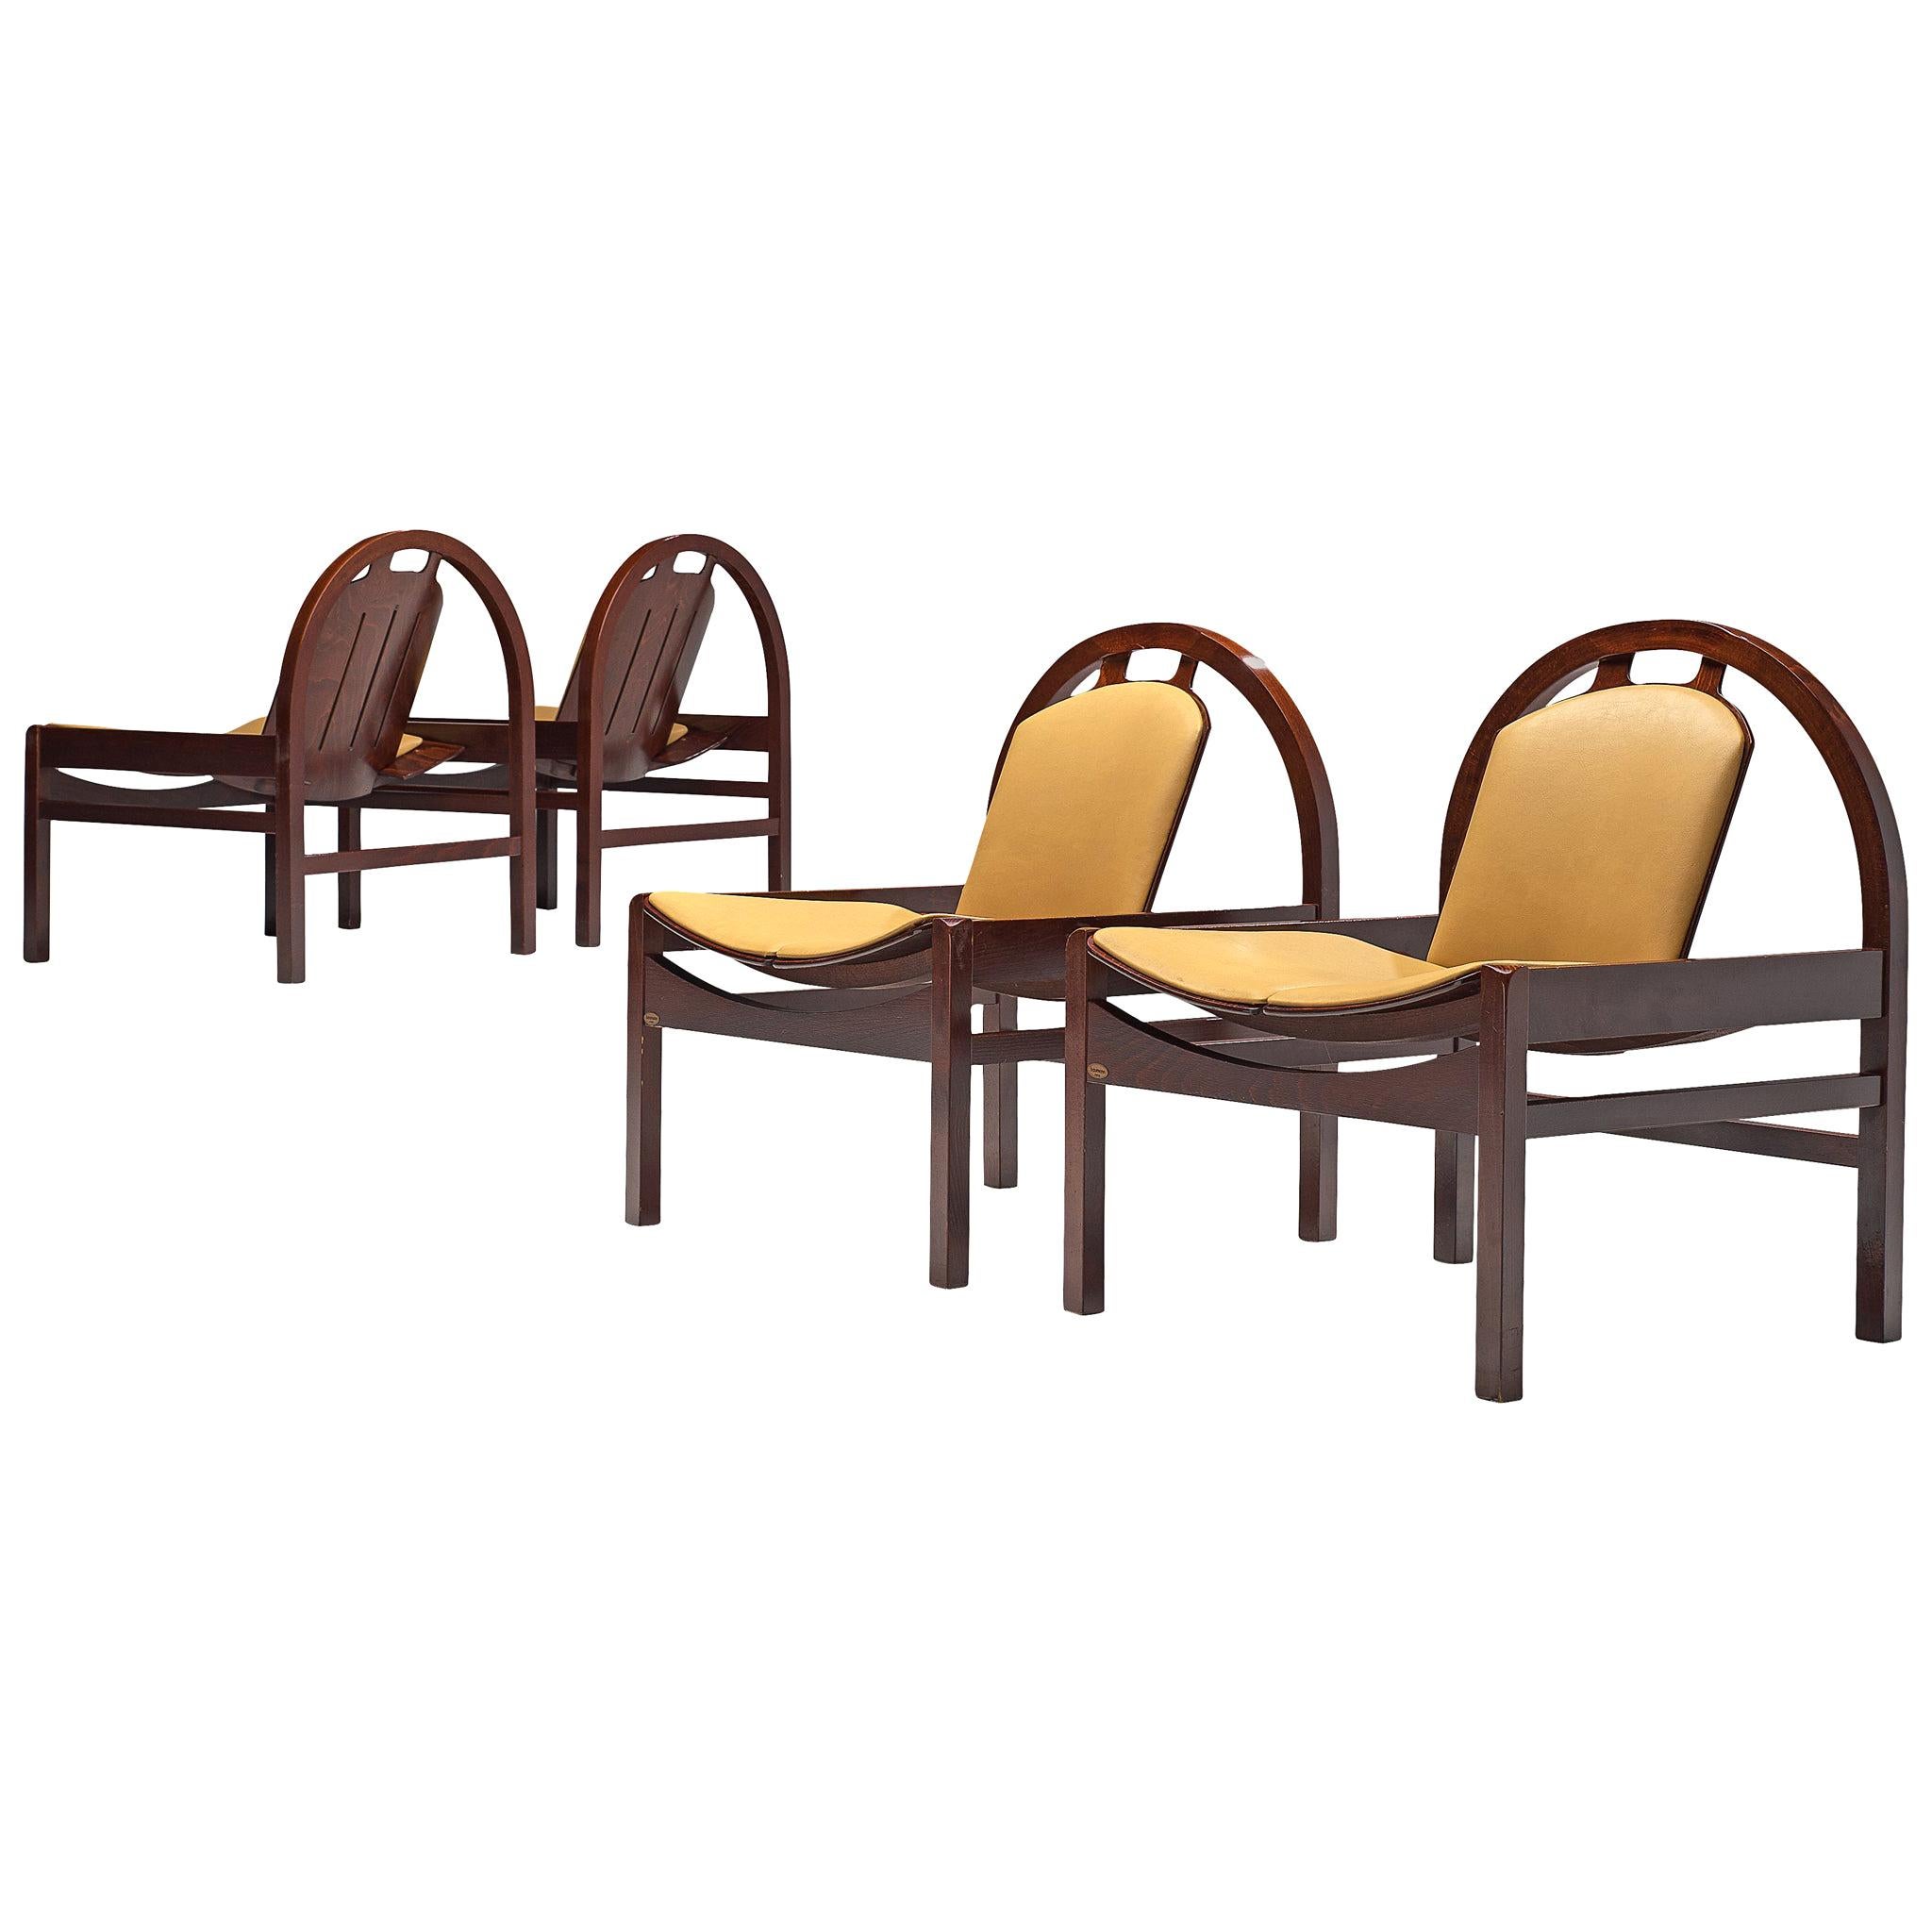 Argo' Set of Four Lounge Chairs by Baumann